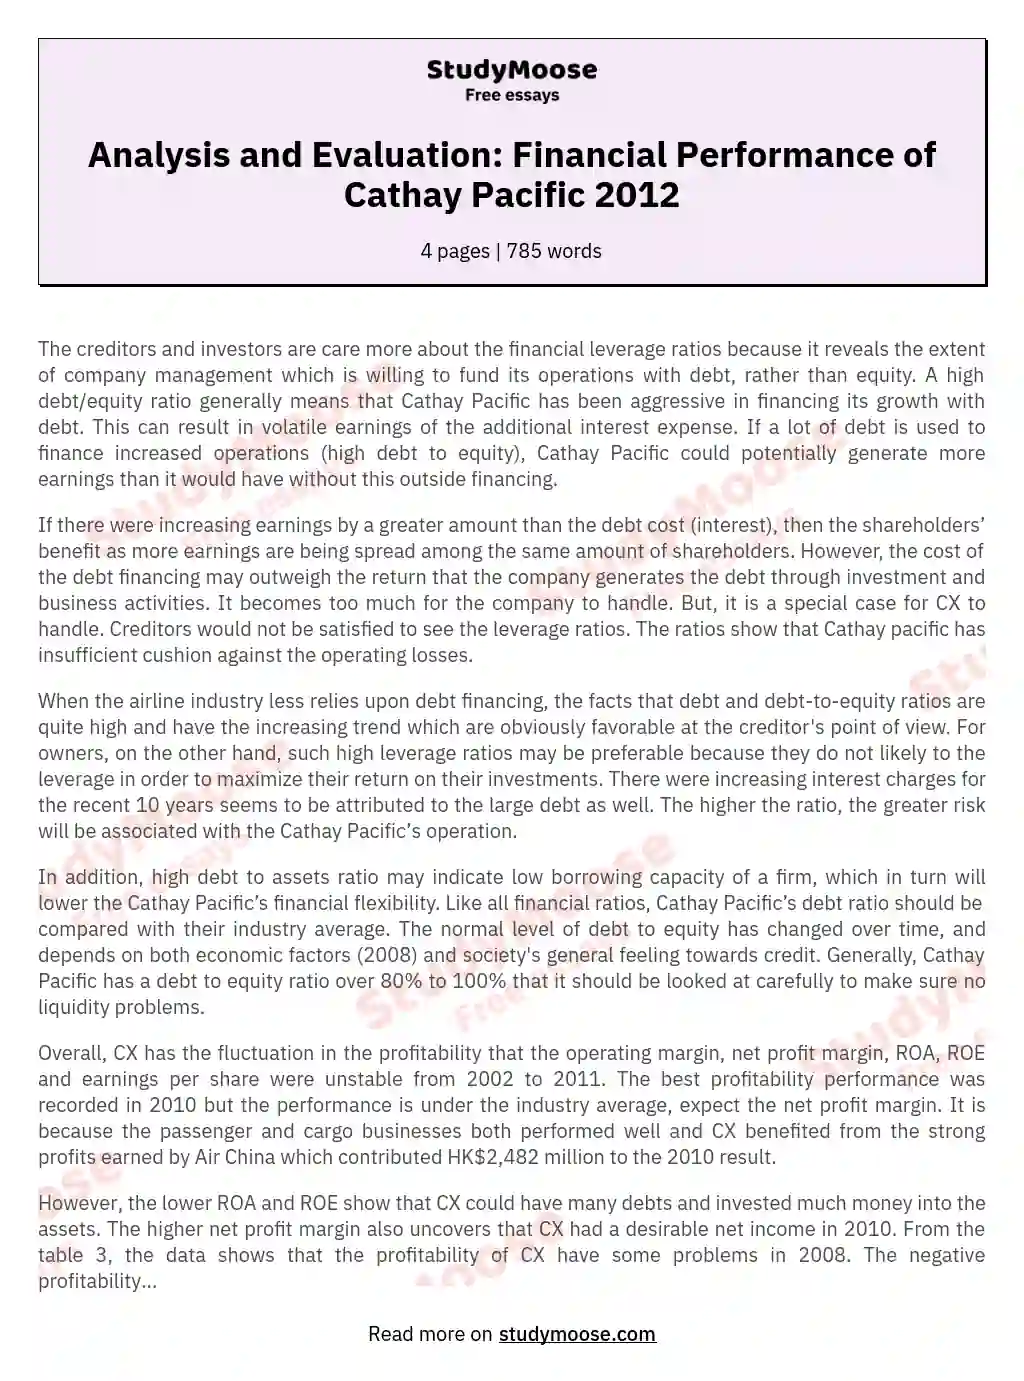 Analysis and Evaluation: Financial Performance of Cathay Pacific 2012 essay